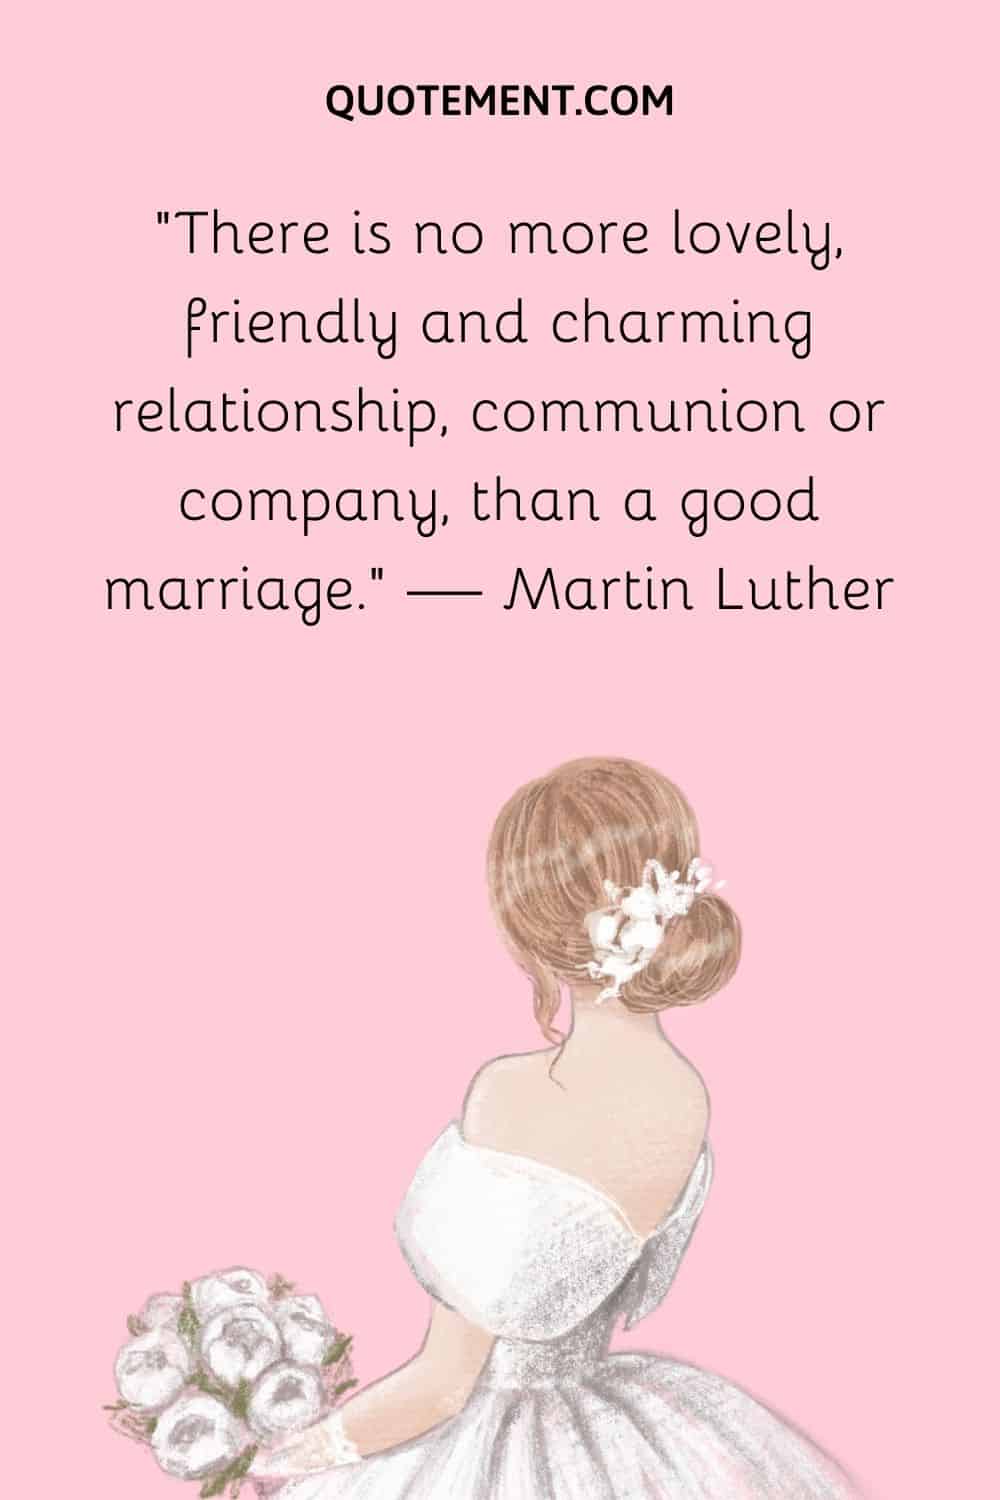 There is no more lovely, friendly and charming relationship, communion or company, than a good marriage. — Martin Luther